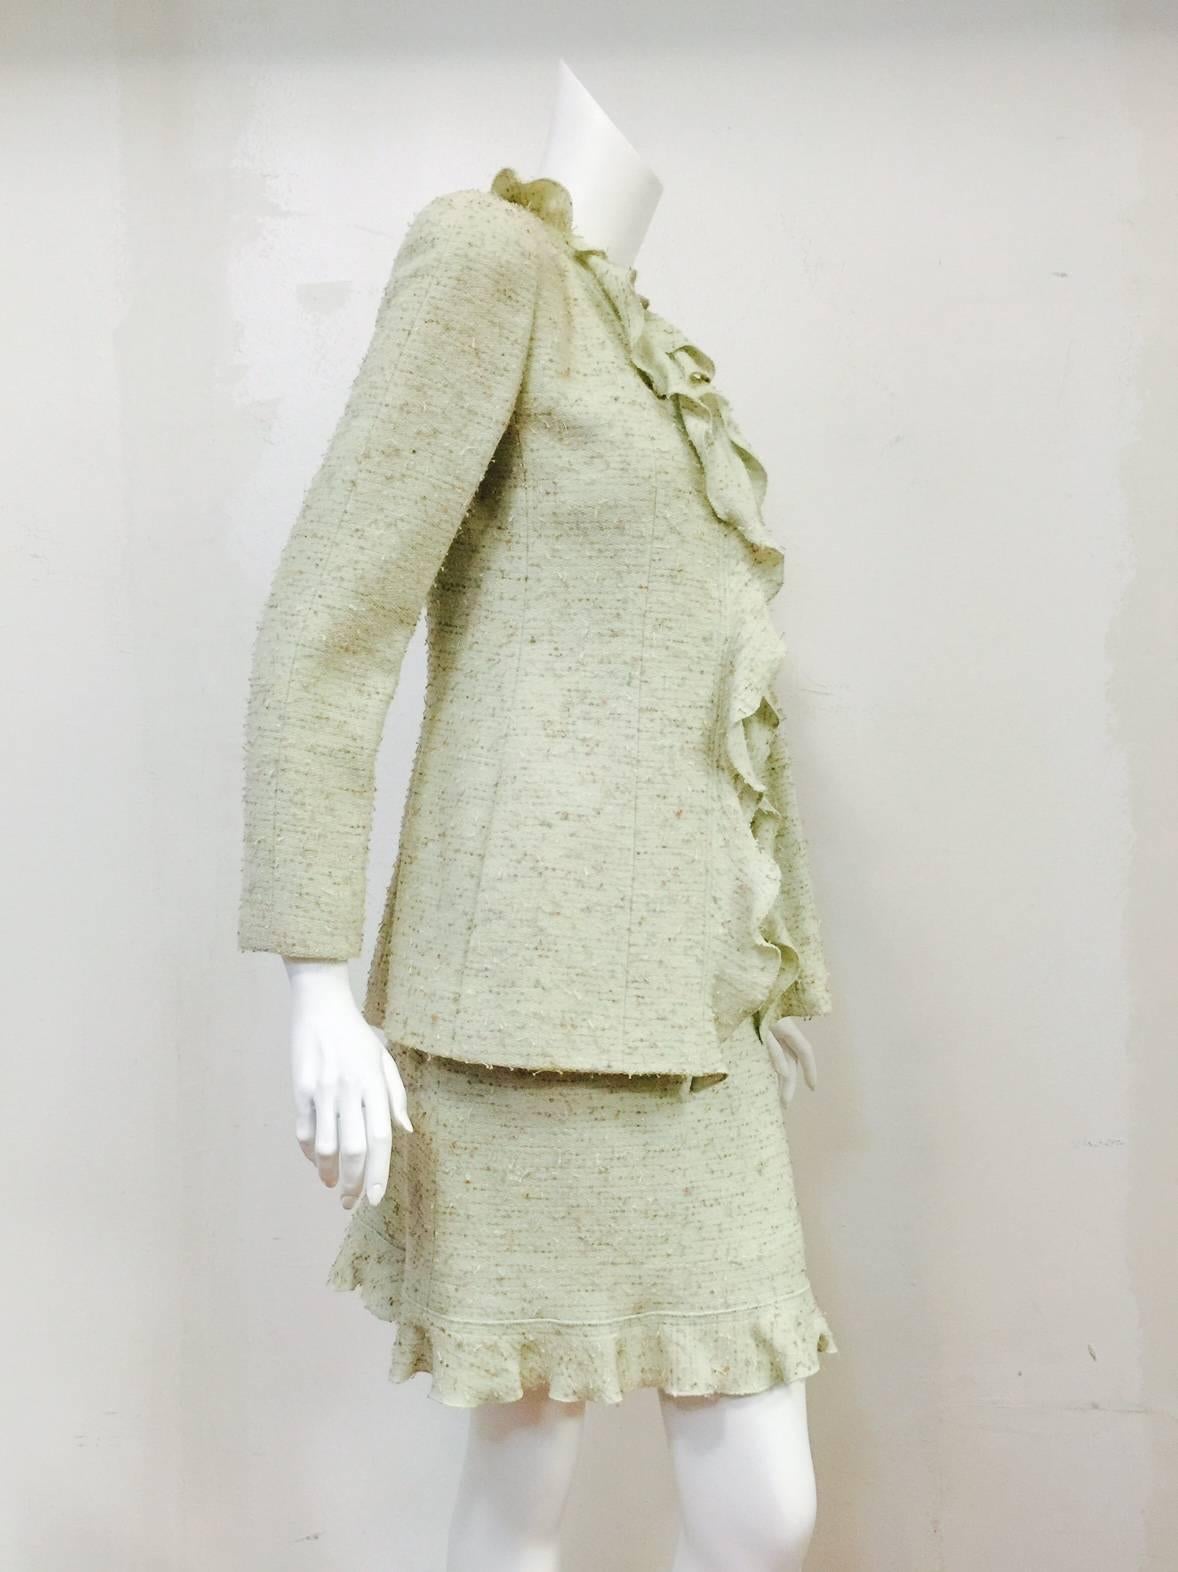 Chanel 1999 Fall Tweed Wool Blend Suit With Ruffles is a wonderful addition to any connoisseur's collection!  Not your more typical tweed creation from the house of Chanel, this suit features a soft shade of pistachio green threaded with multi color